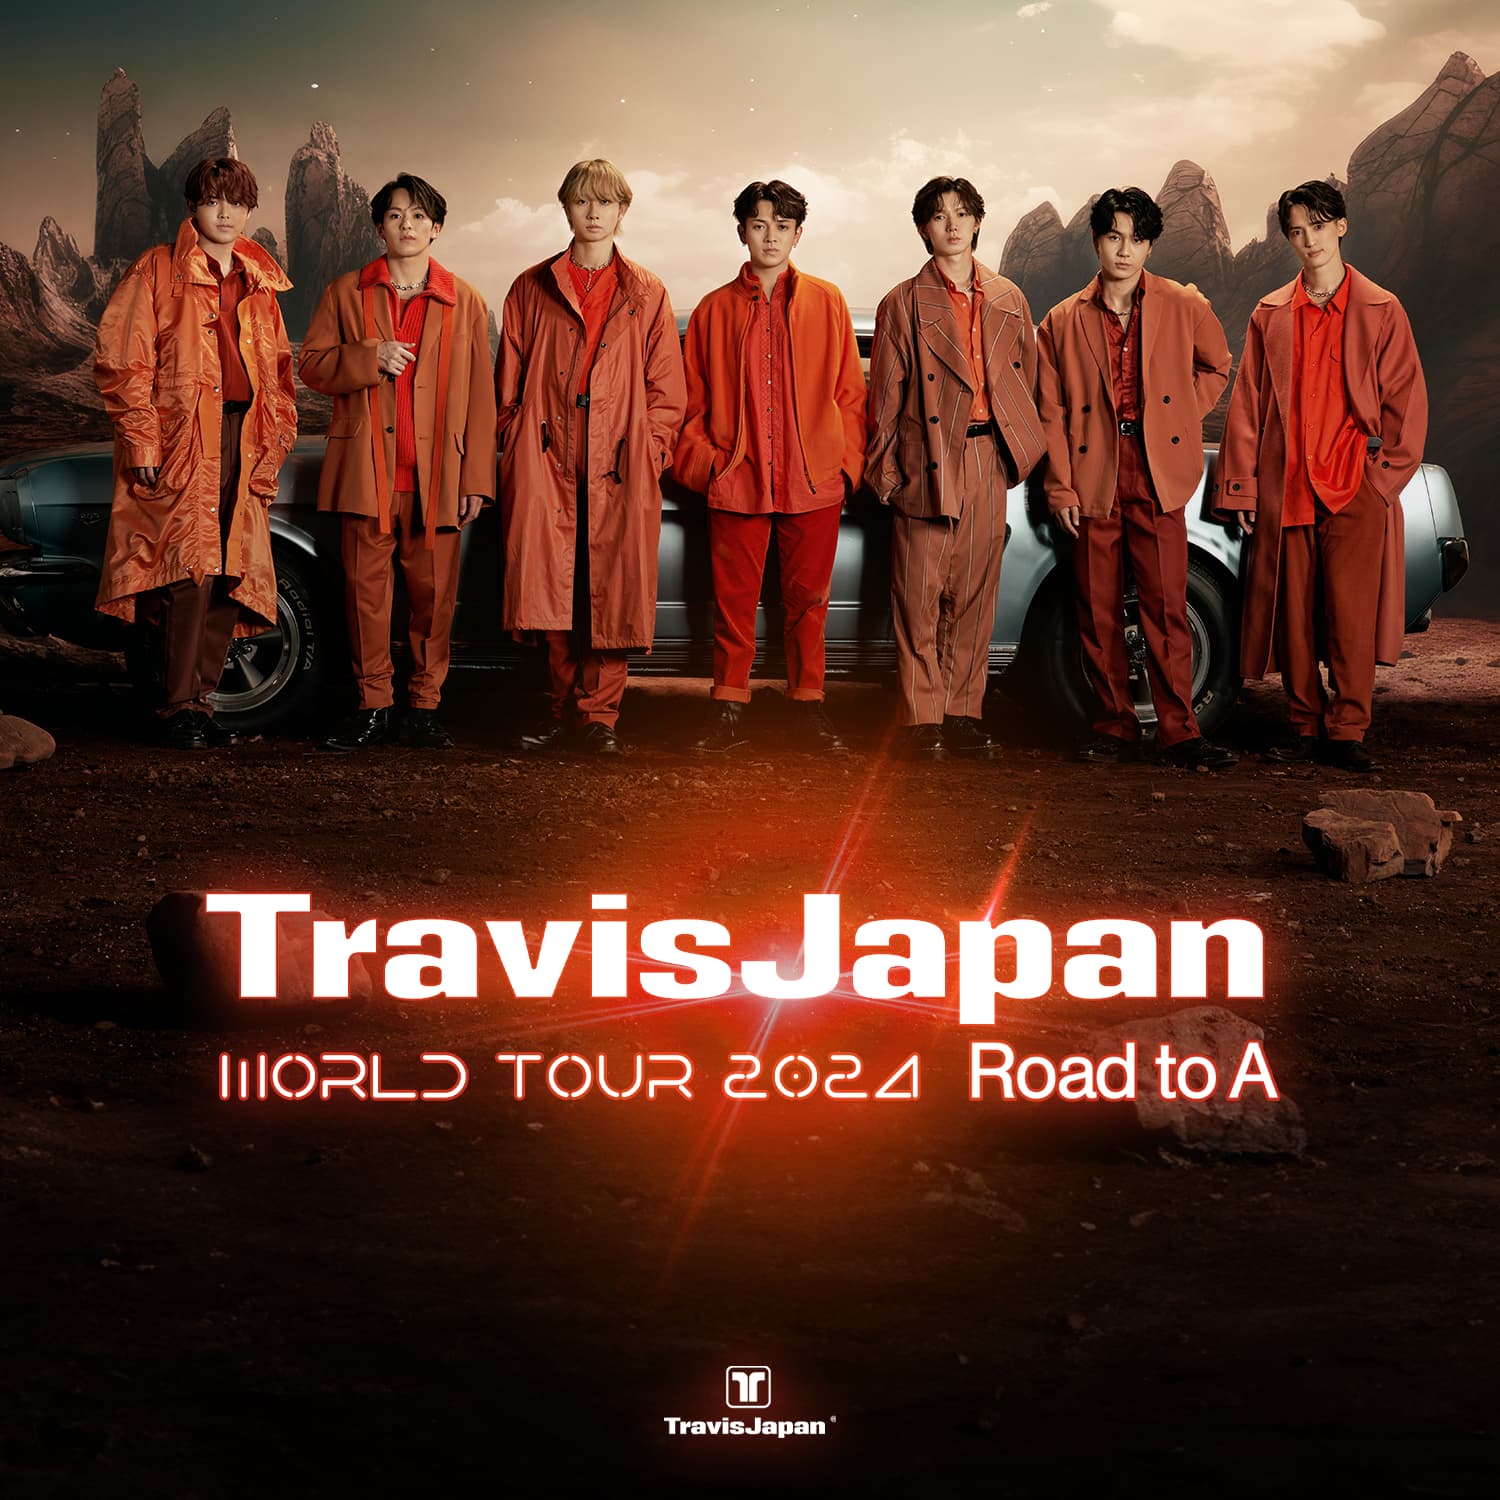 Travis Japan World Tour 2024 Road to A